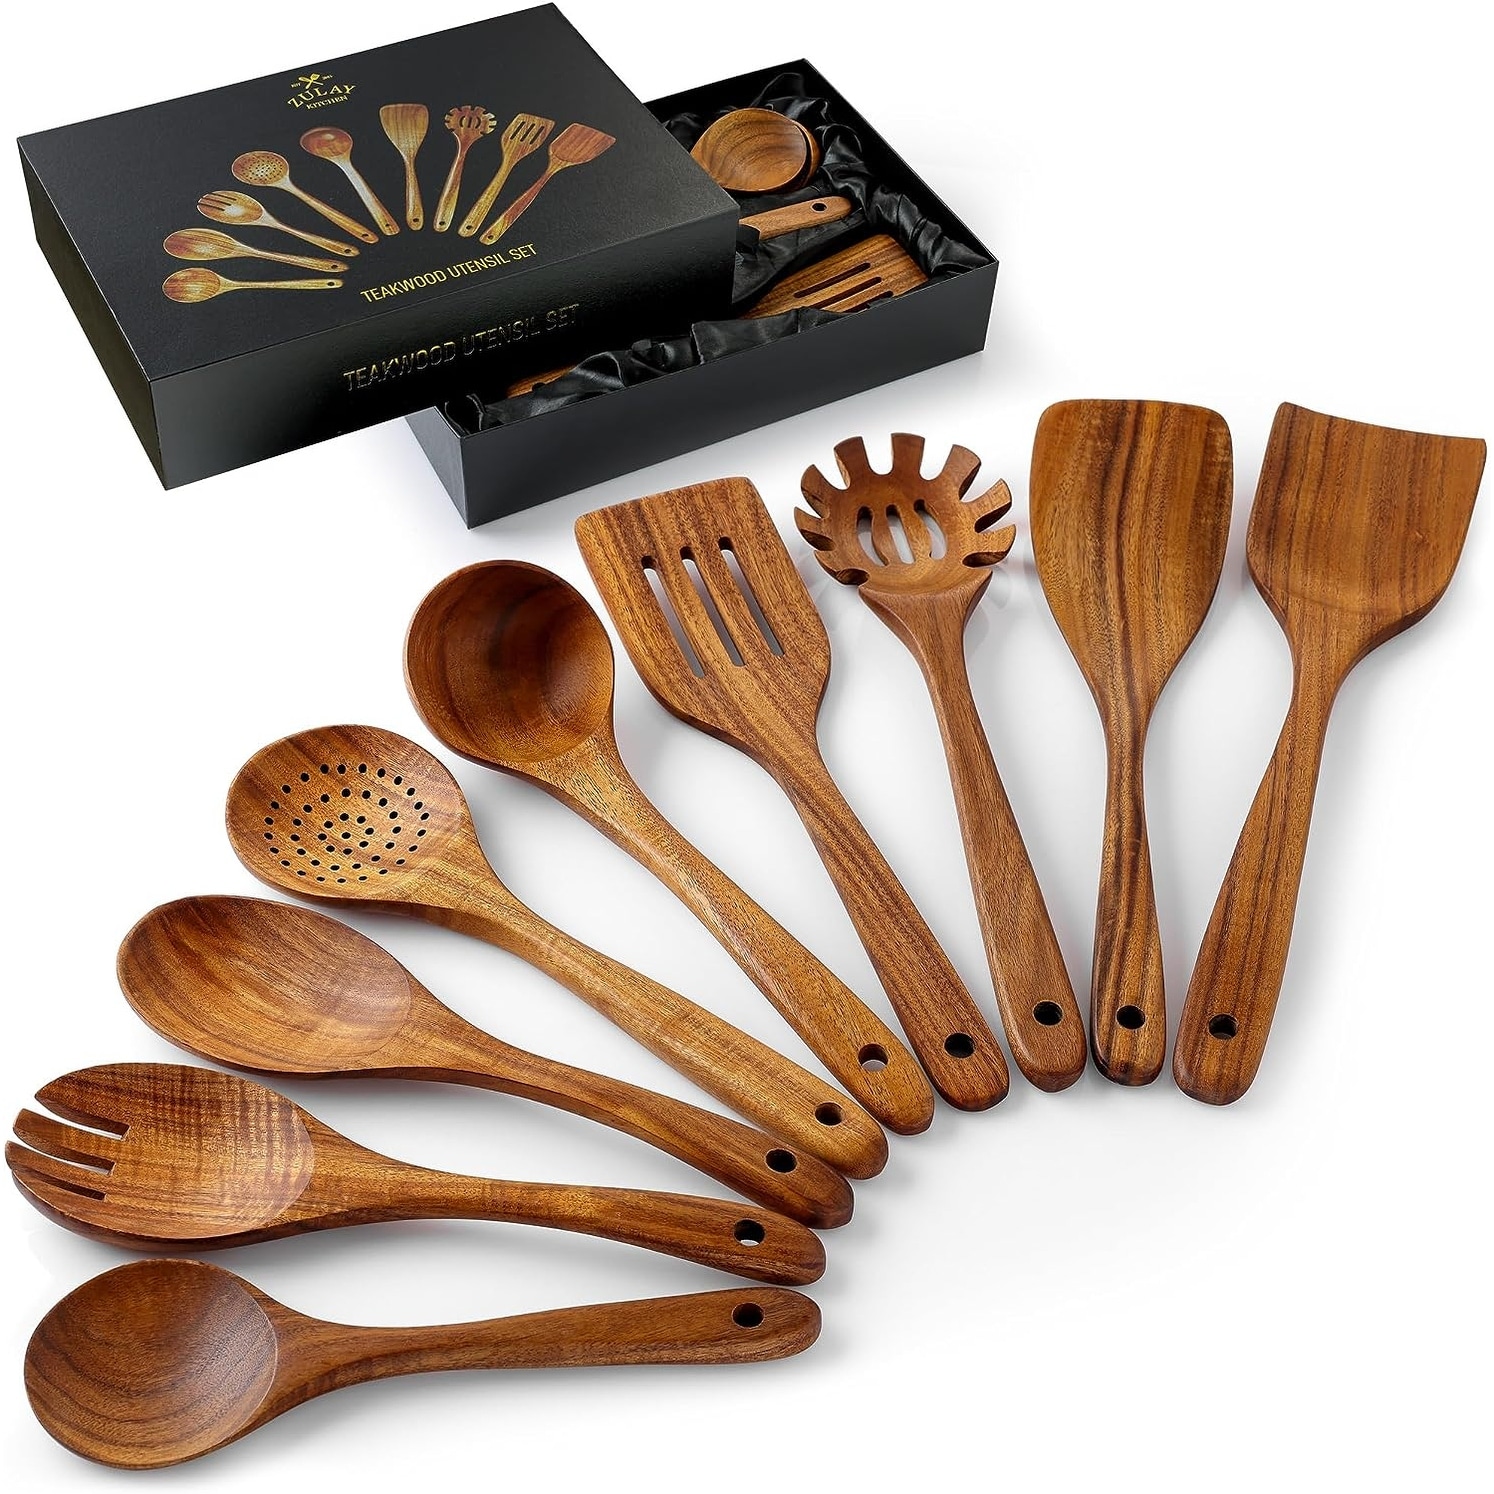 9 Piece Black Colored Silicone Kitchen Utensils Set with Wooden Handles by Elyon Tableware